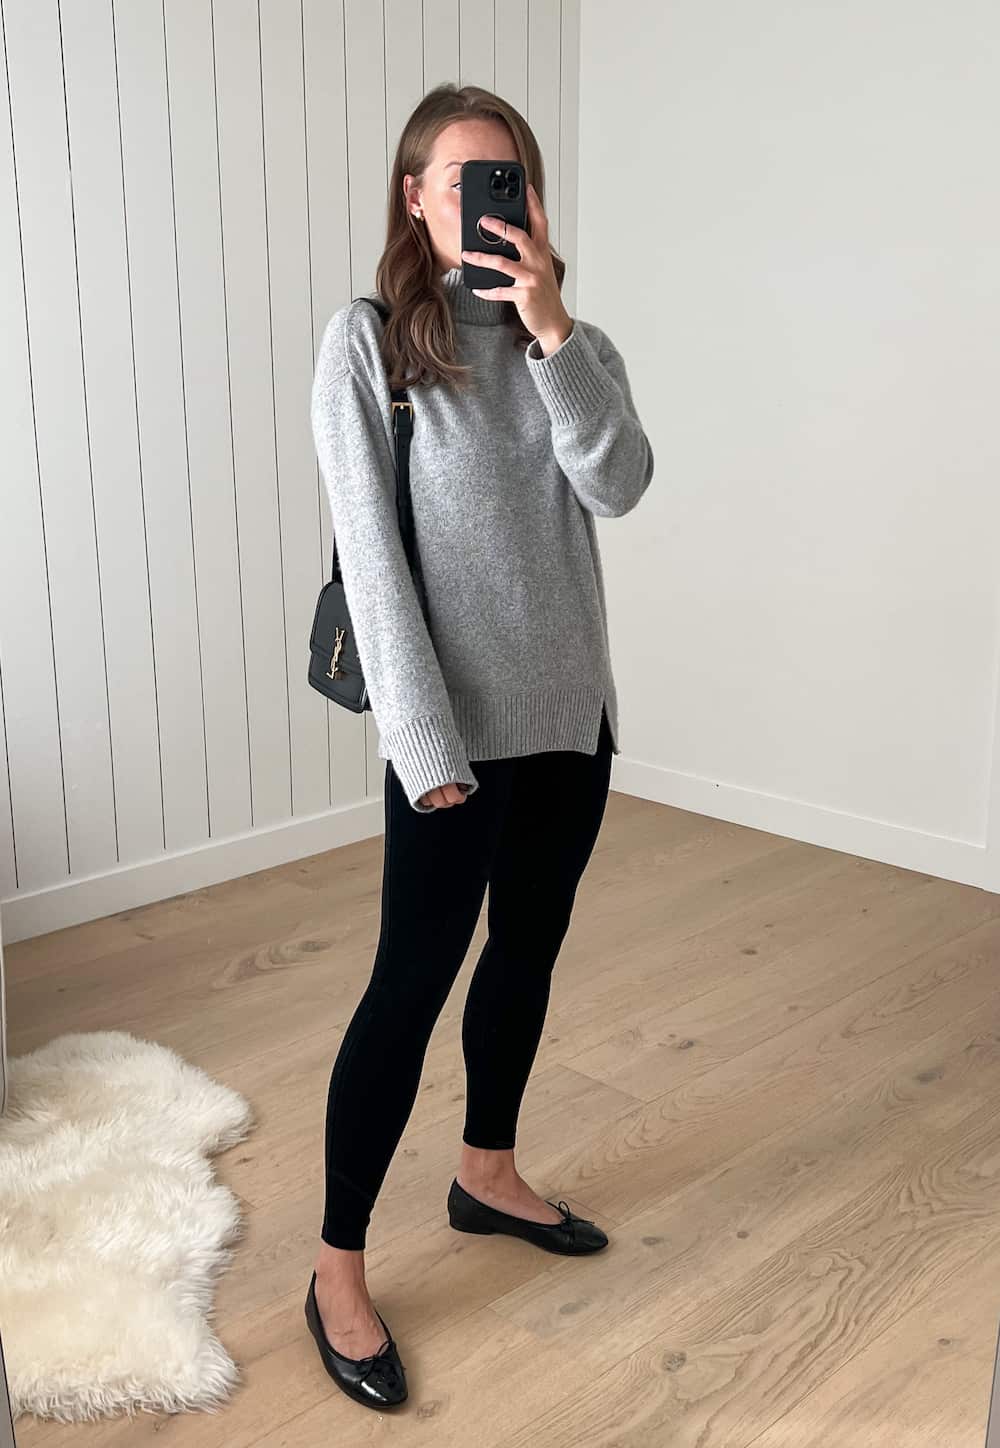 Woman wearing black velvet leggings with a grey sweater and ballet flats.